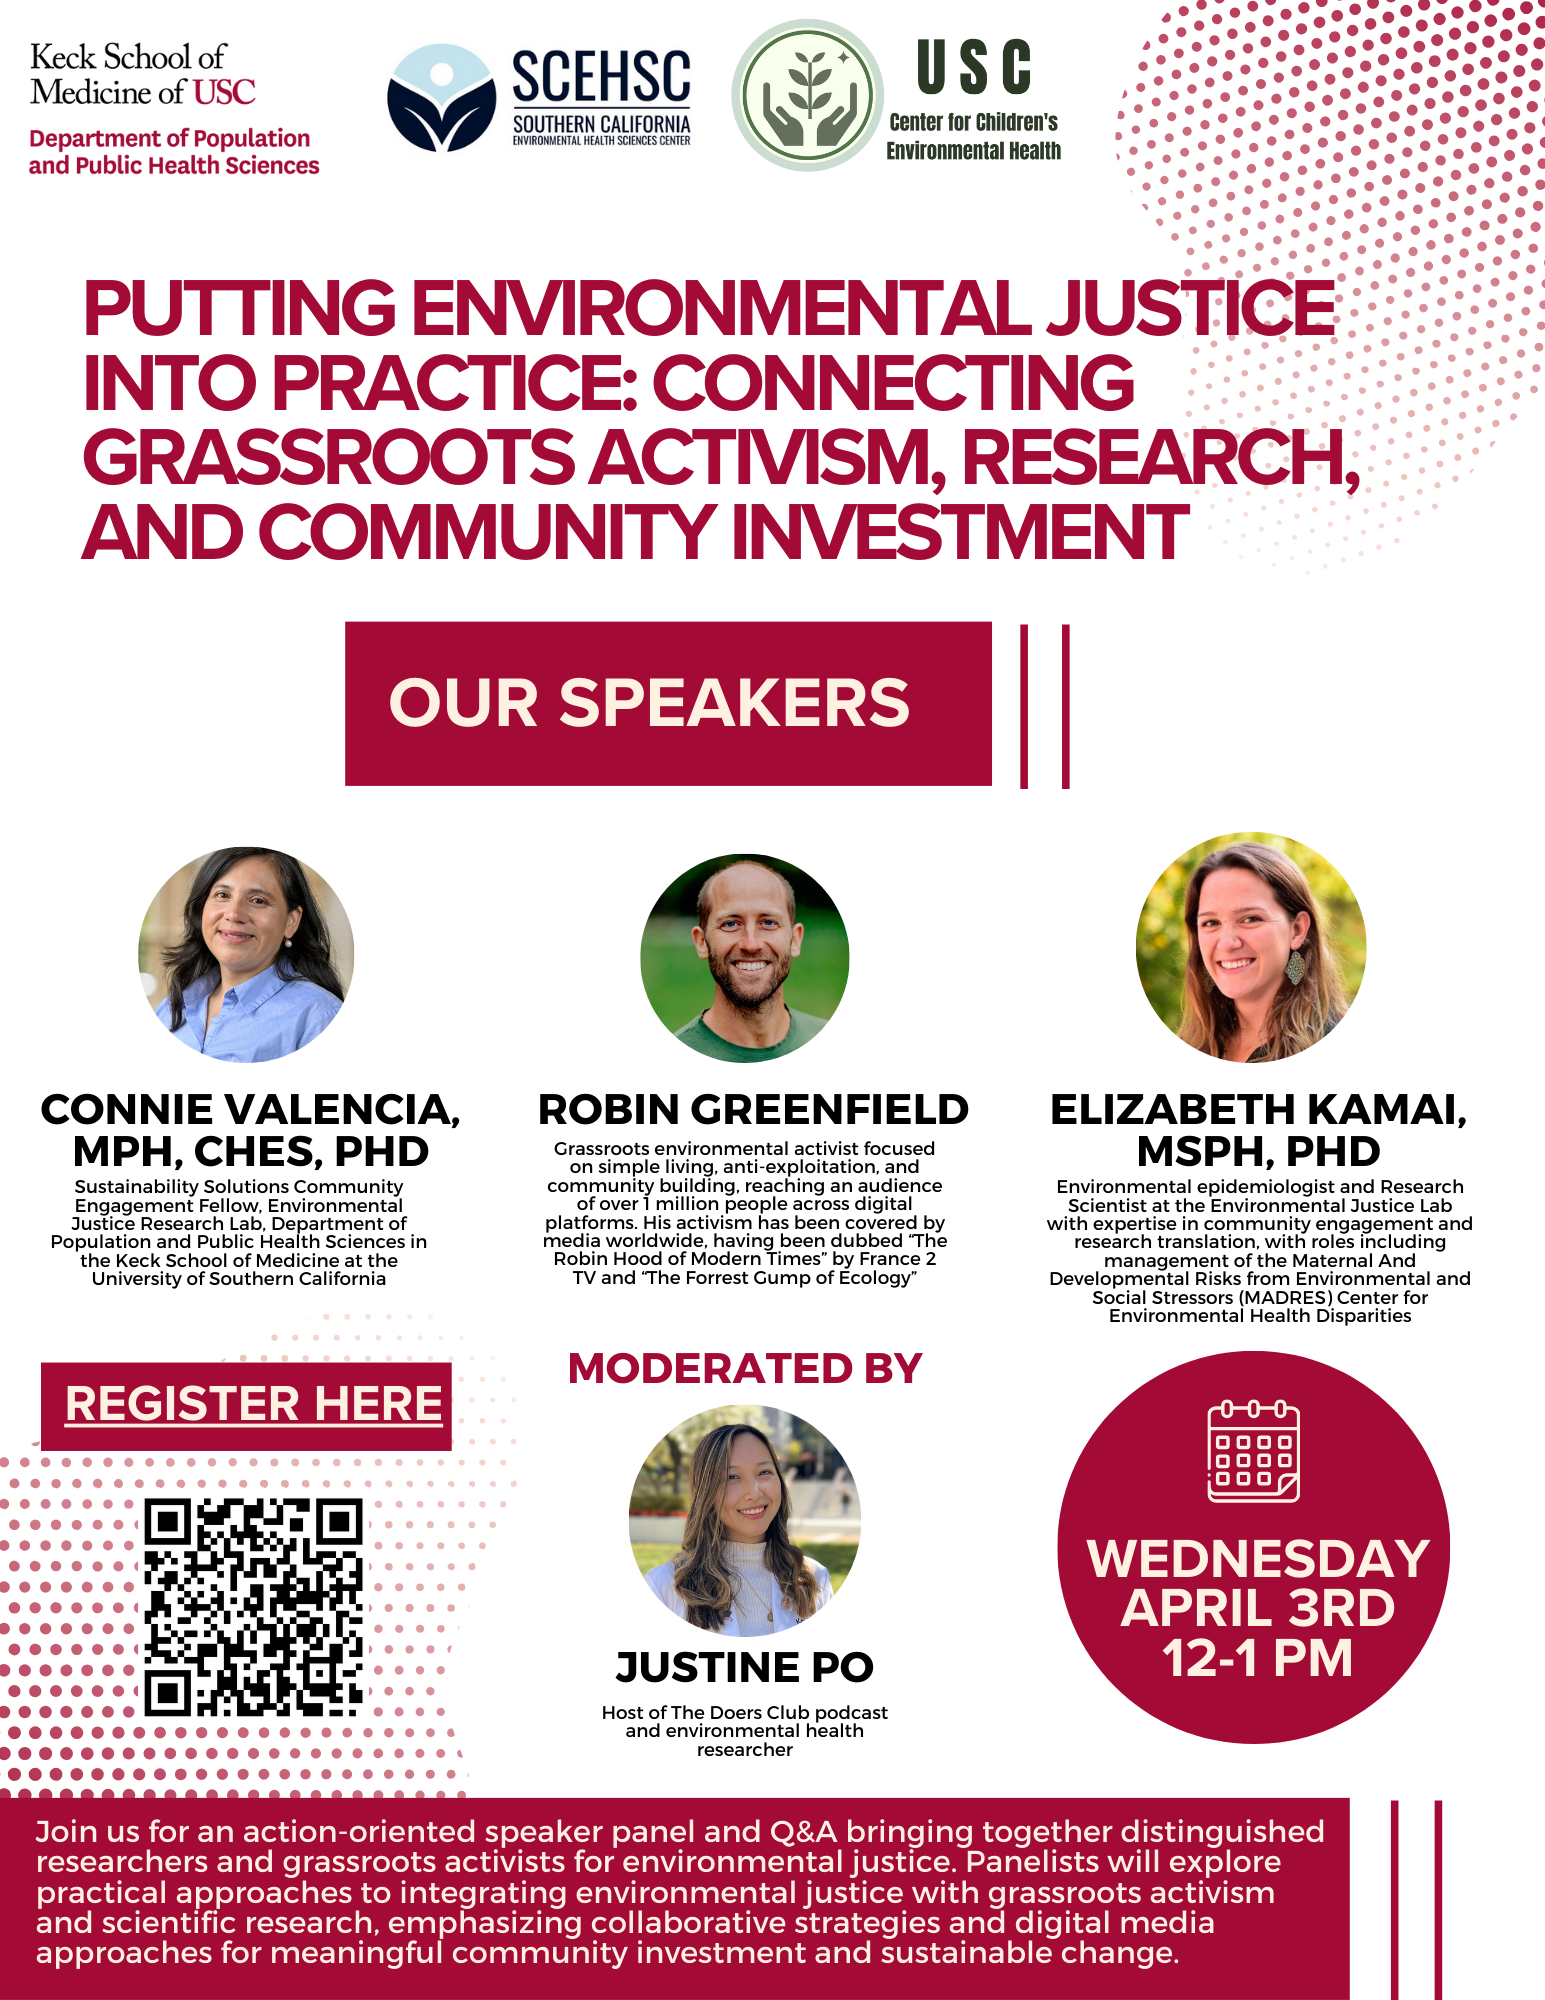 Putting Environmental Justice into Practice Connecting Grassroots Activism, Research, and Community Investment flyer